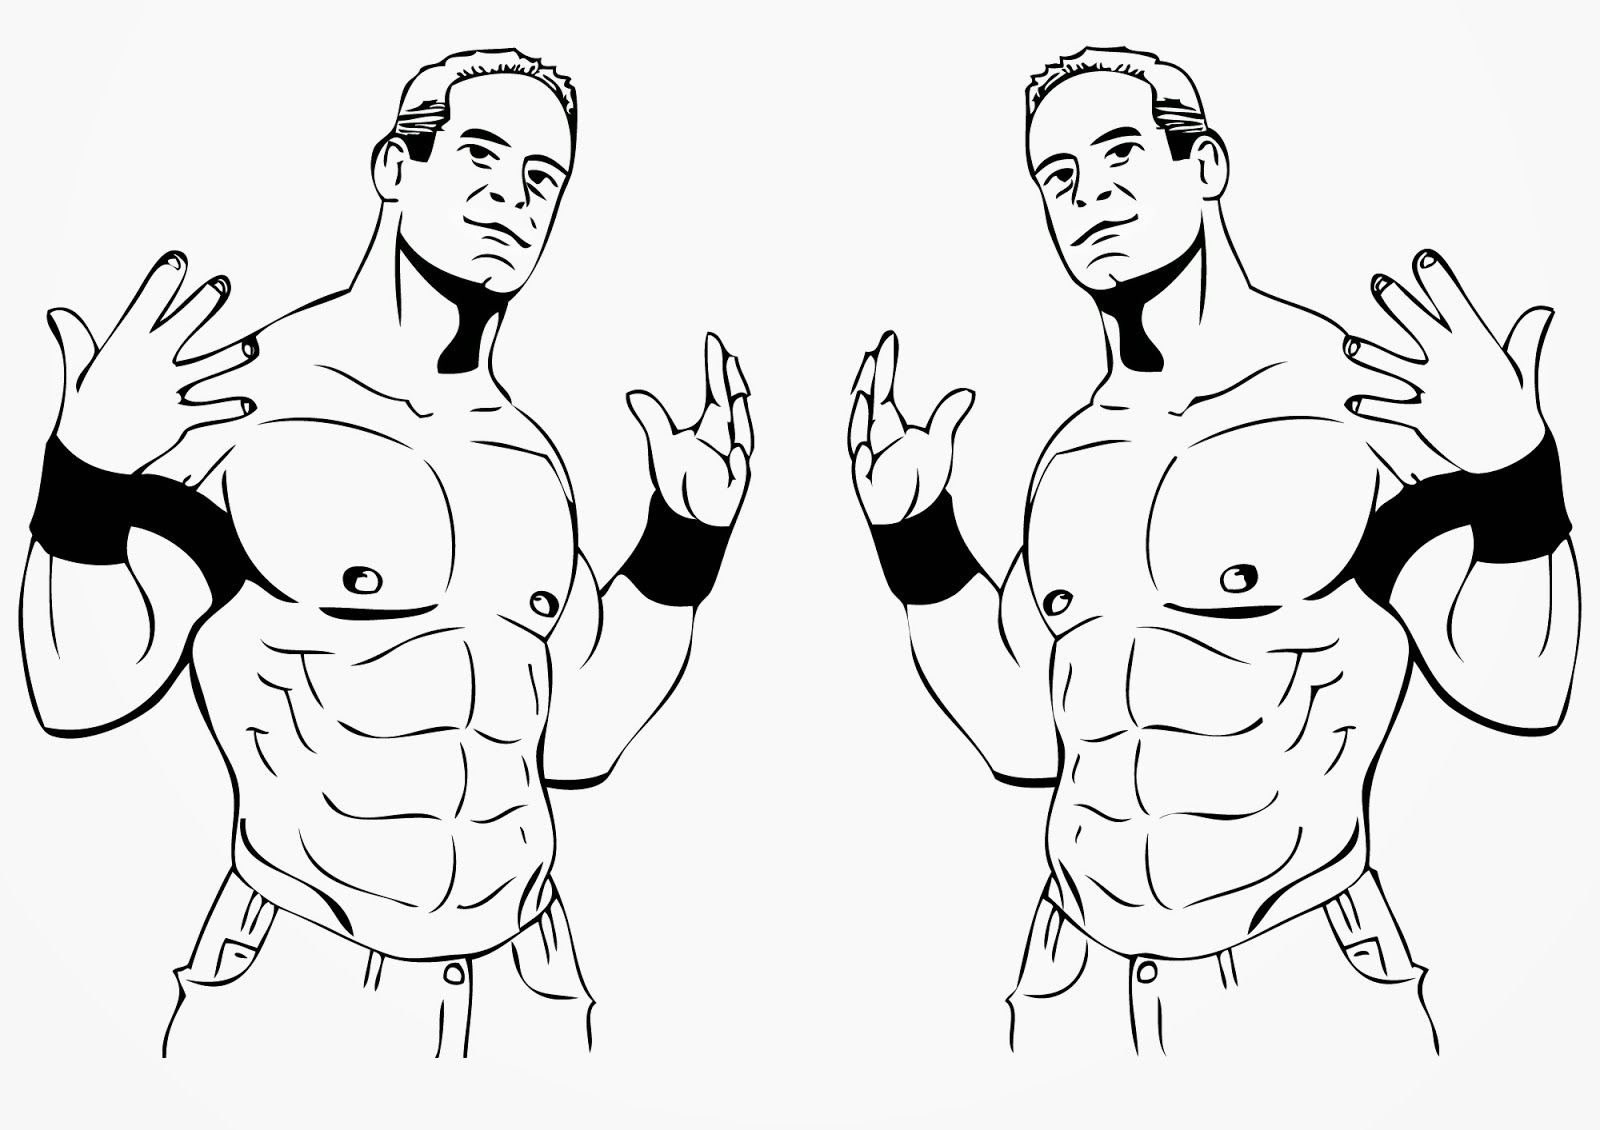 John Cena - Coloring Pages for Kids and for Adults